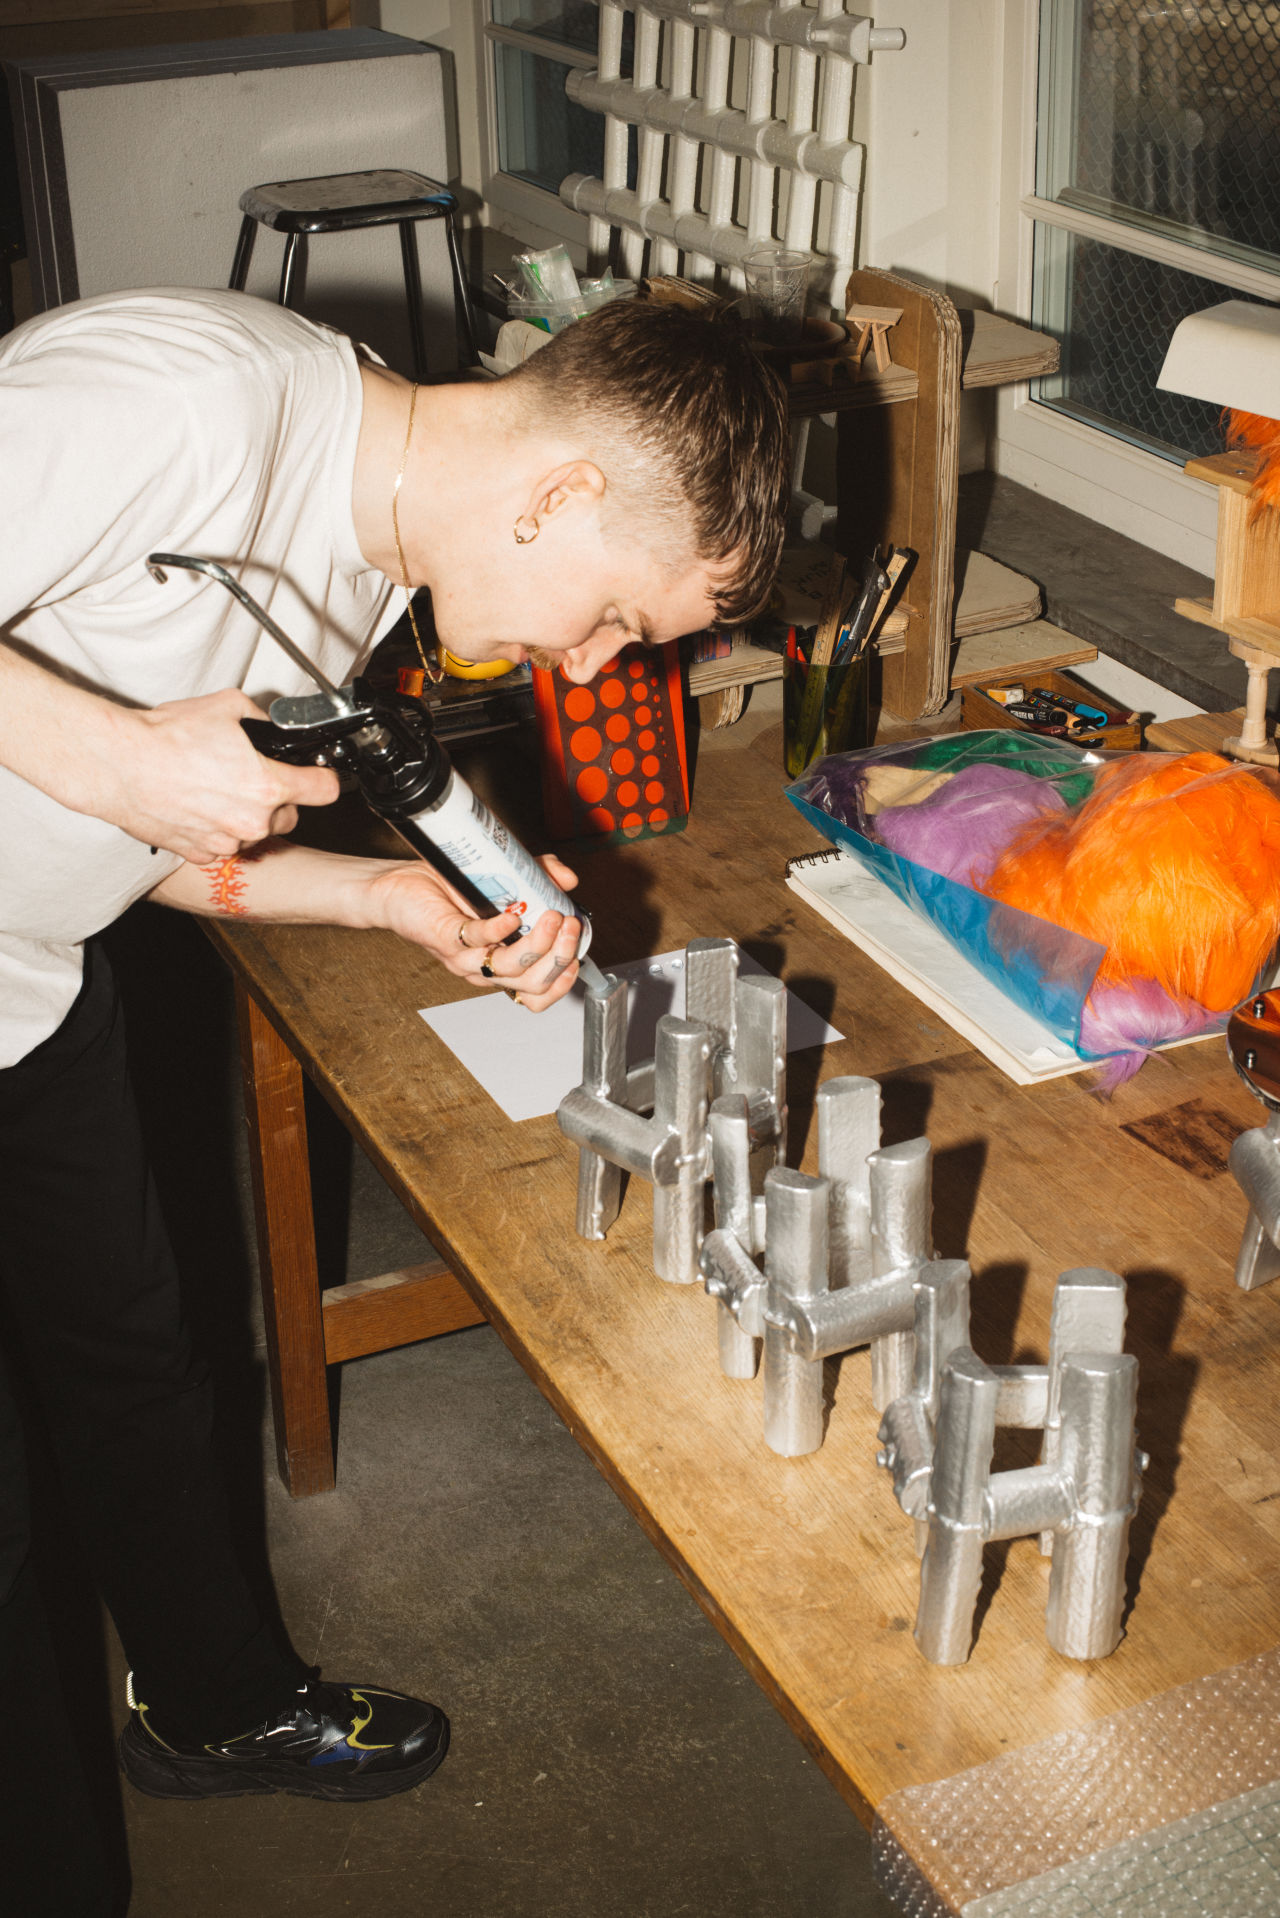 An editorial image from behind the scenes of the making of Power Plinth, a Hem X Limited Edition piece.